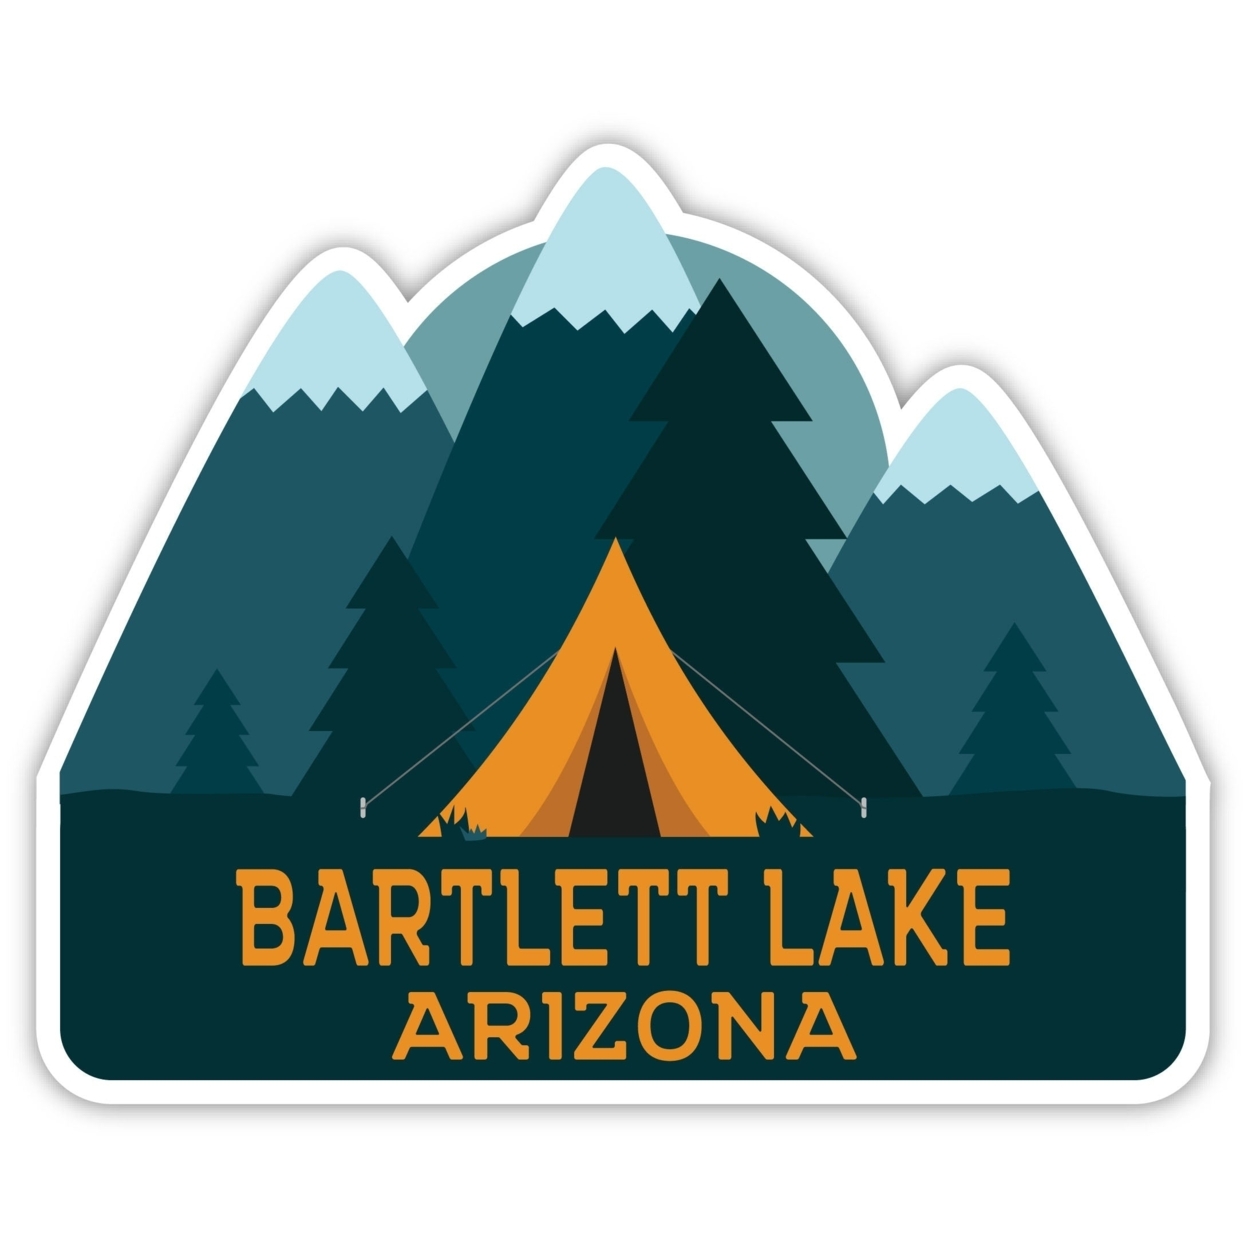 Bartlett Lake Arizona Souvenir Decorative Stickers (Choose Theme And Size) - 4-Pack, 4-Inch, Great Outdoors